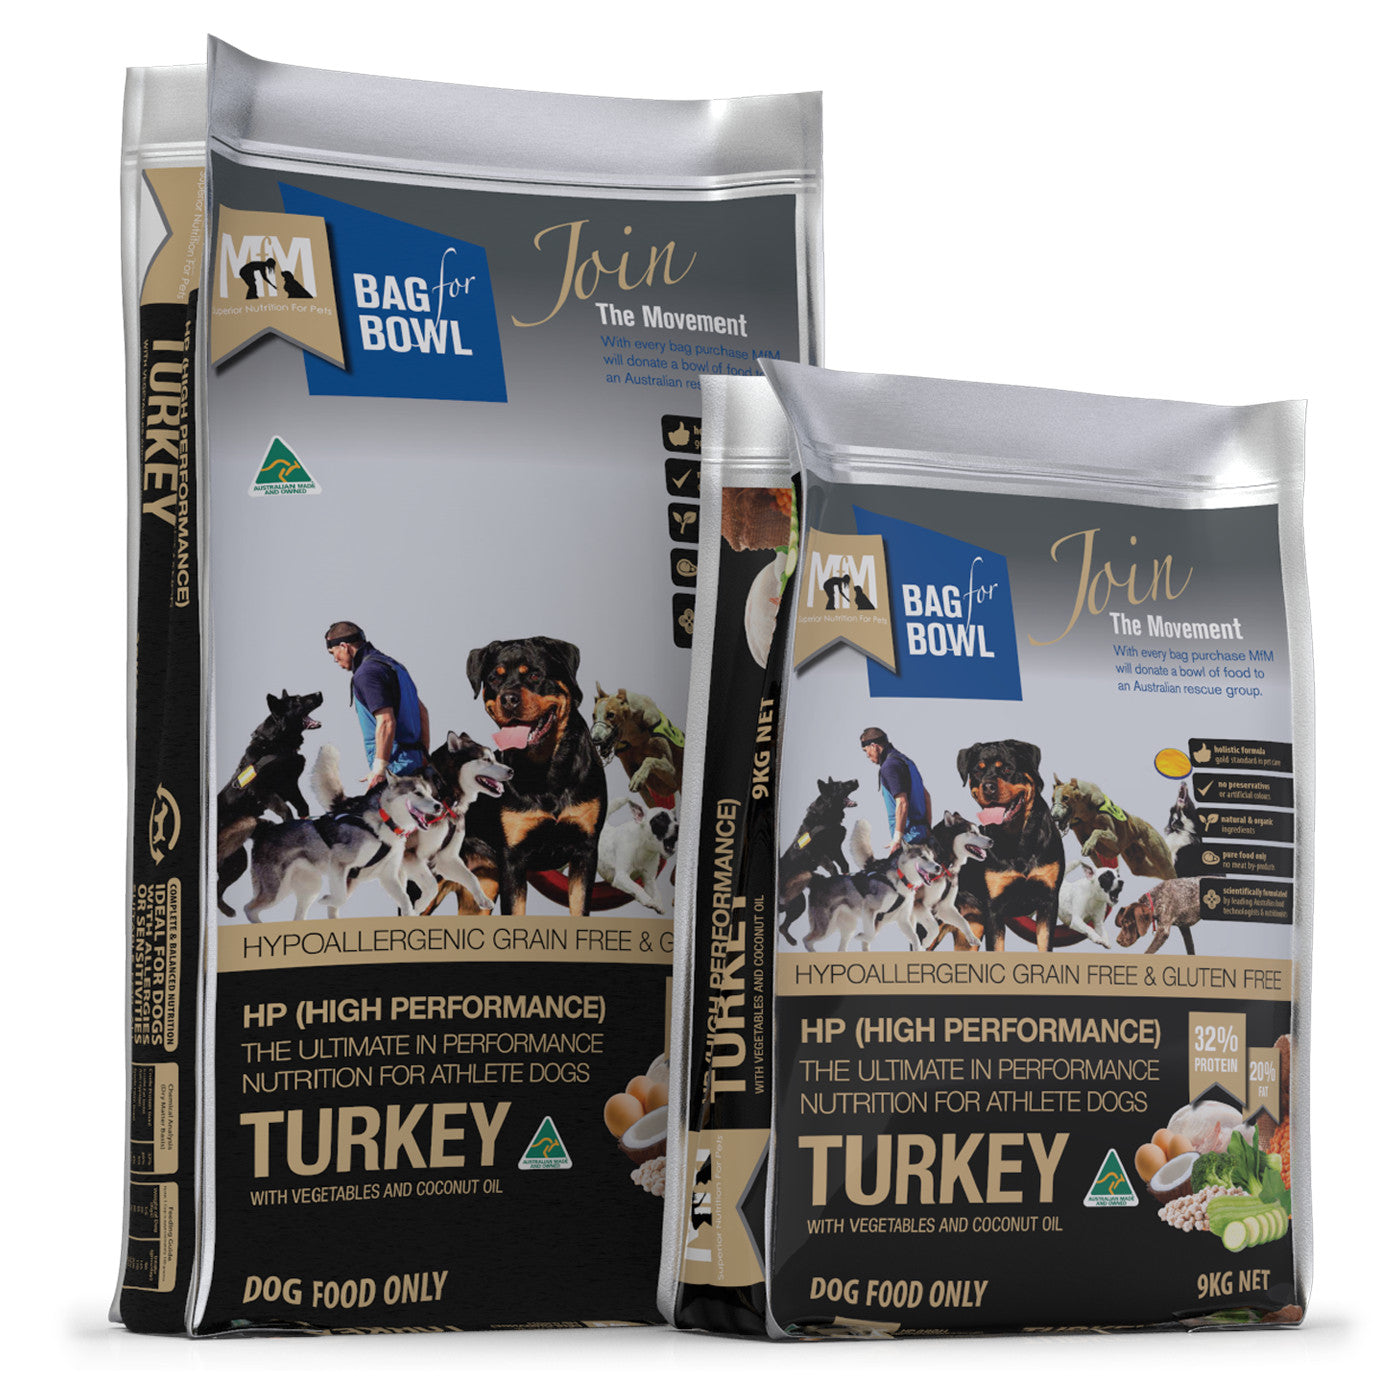 Meals for Mutts High Performance Turkey Dog Food.